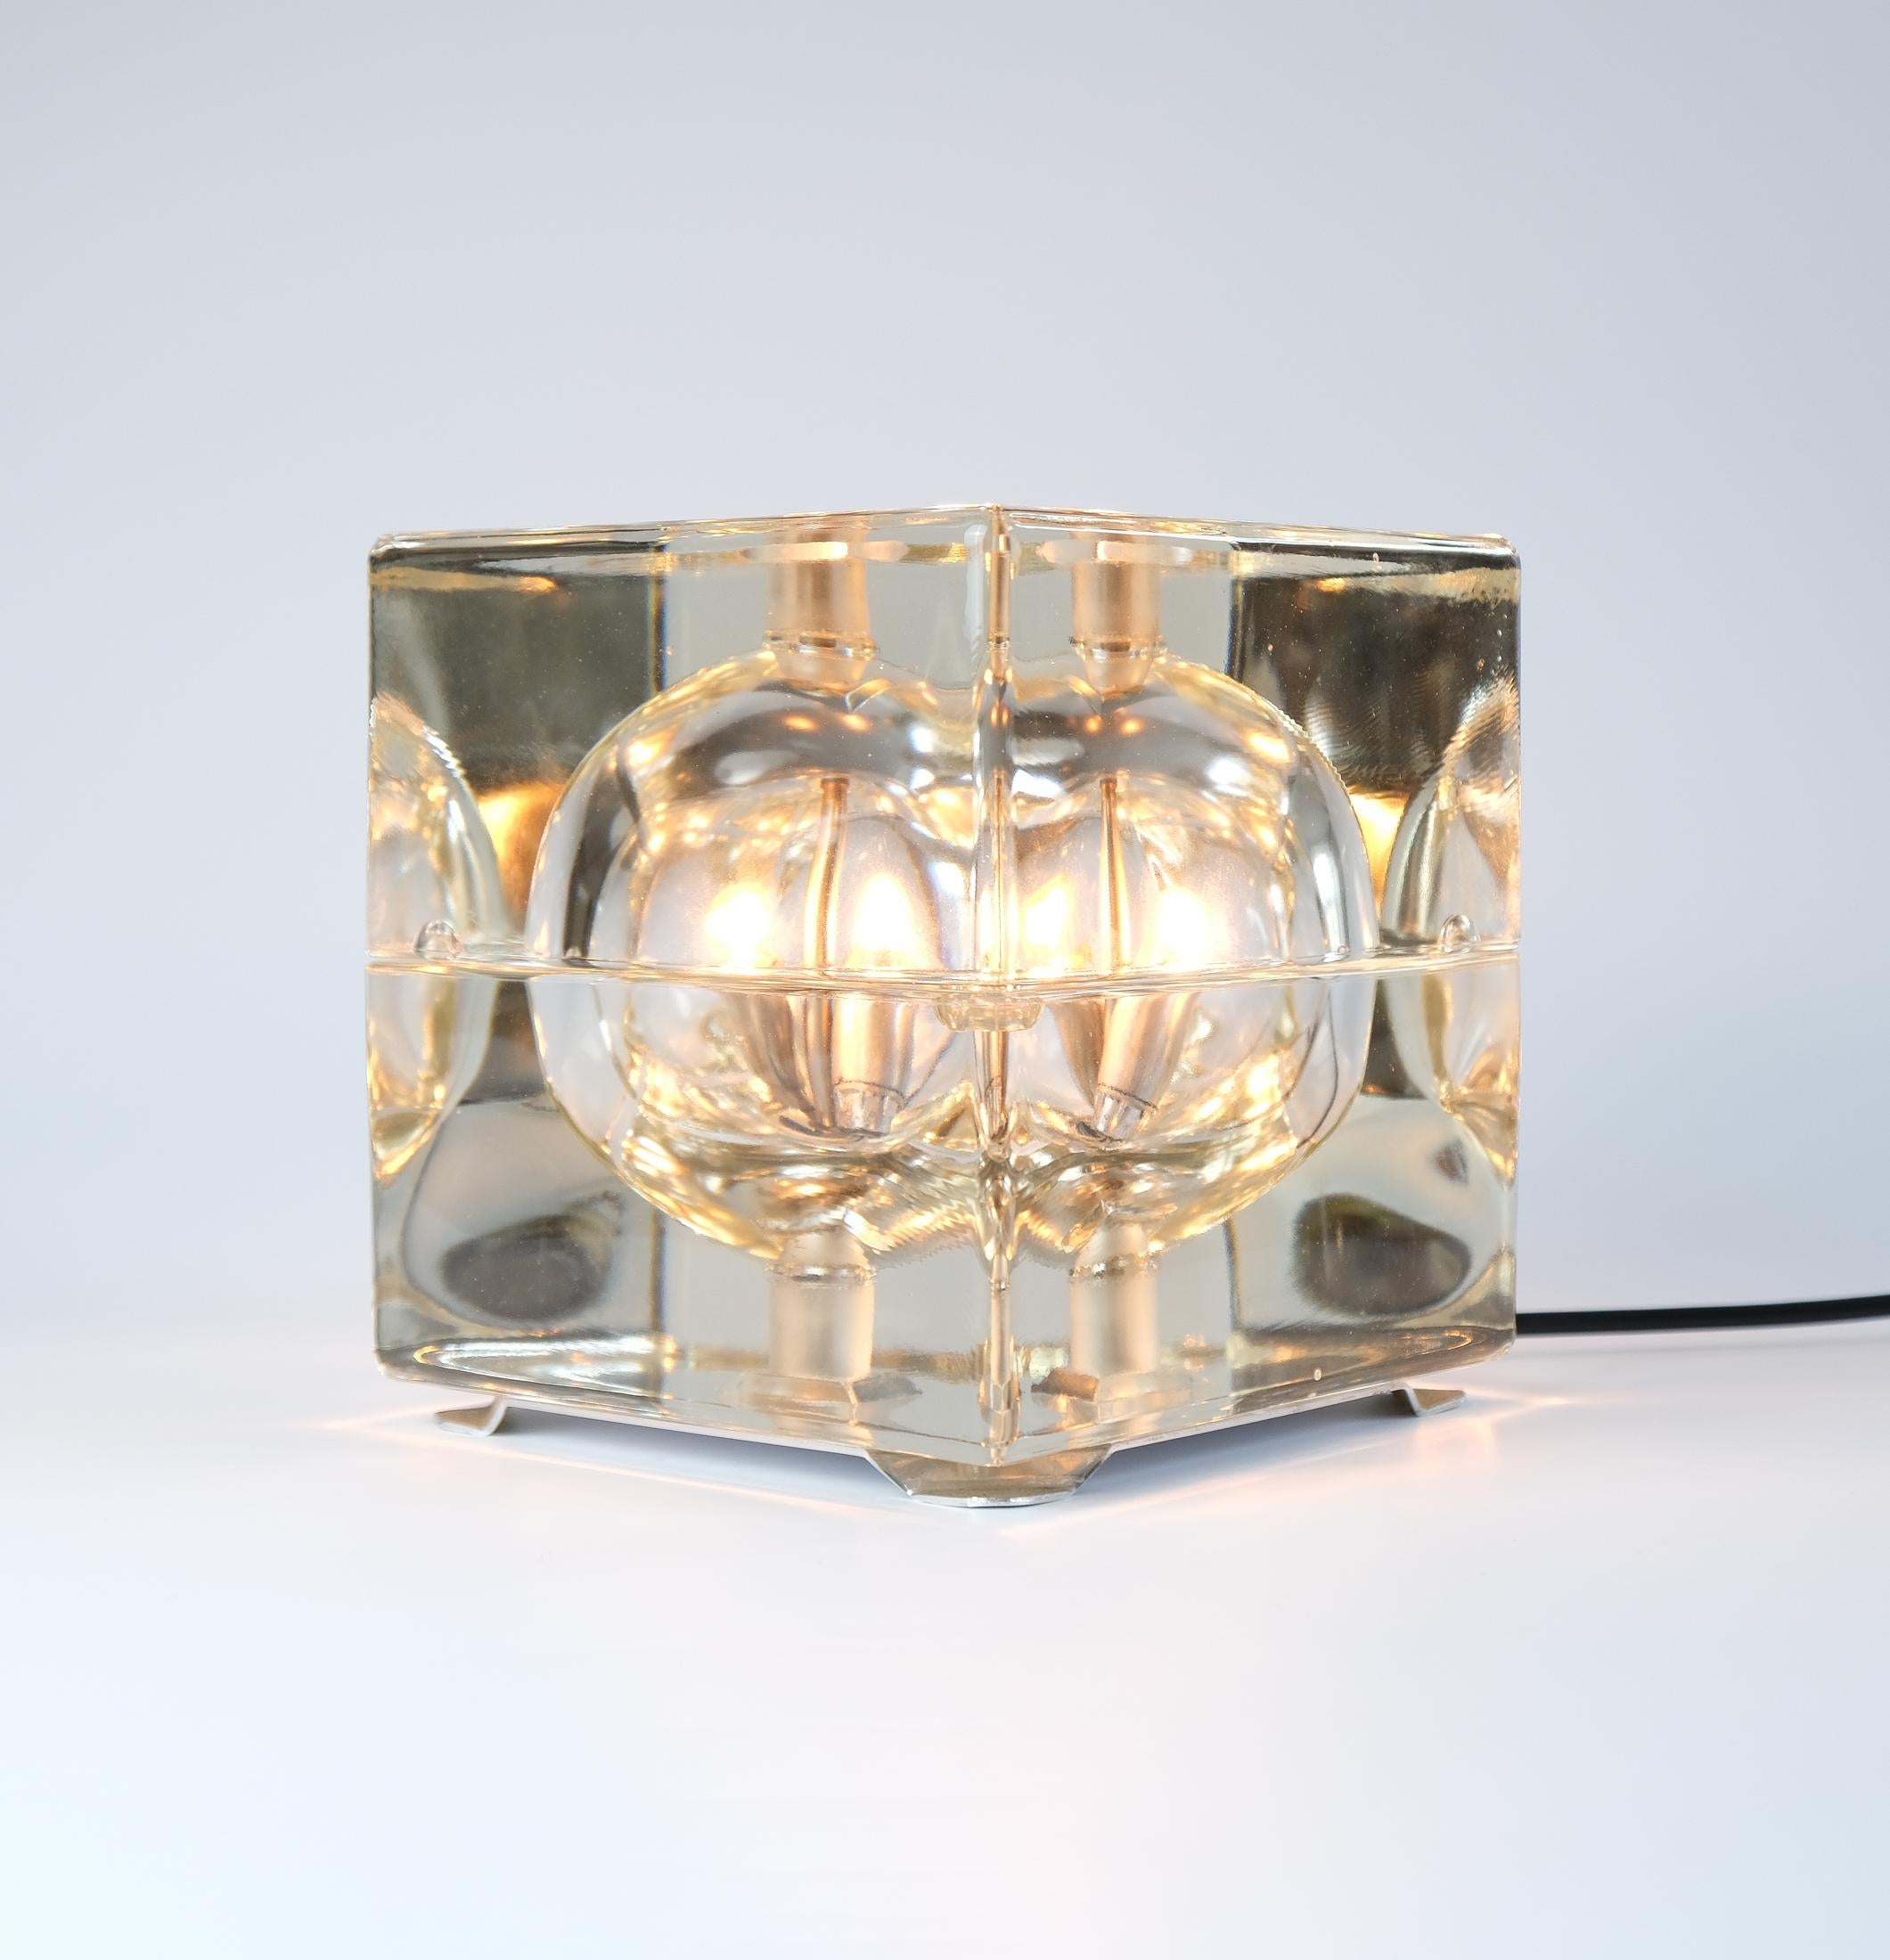 For sale is a spectacular and truly special piece of Italian Mid-Century lighting, the 